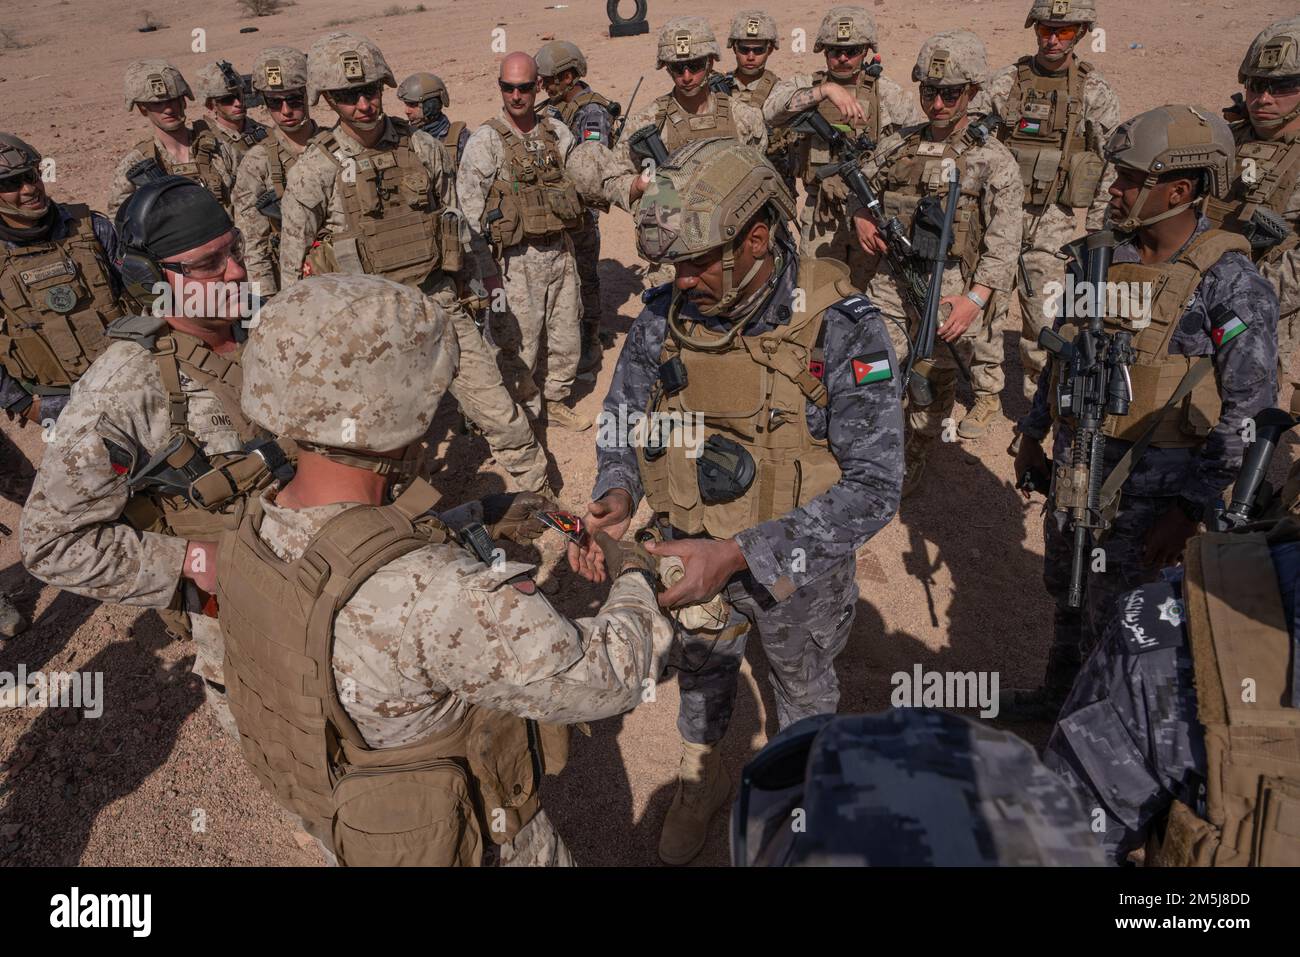 CAMP TITIN, Jordan (March 18, 2022) - A U.S. Marine assigned to Fox Company, 2nd Battalion, 24th Marines shakes hands and exchanges a patch with a Jordanian Marine from the 77th Royal Jordanian Marine Battalion after the final exercise (FINEX) of Intrepid Maven (IM) 22-1 aboard Camp Titin, Jordan, March 18. IM is a bilateral engagement series between U.S. Marine Corps Forces, Central Command and the Jordanian Armed Forces (JAF) that provides an opportunity to exchange military tactics and expertise. IM 22-1 is the first of multiple engagements scheduled between the U.S. Marine Corps and the JA Stock Photo